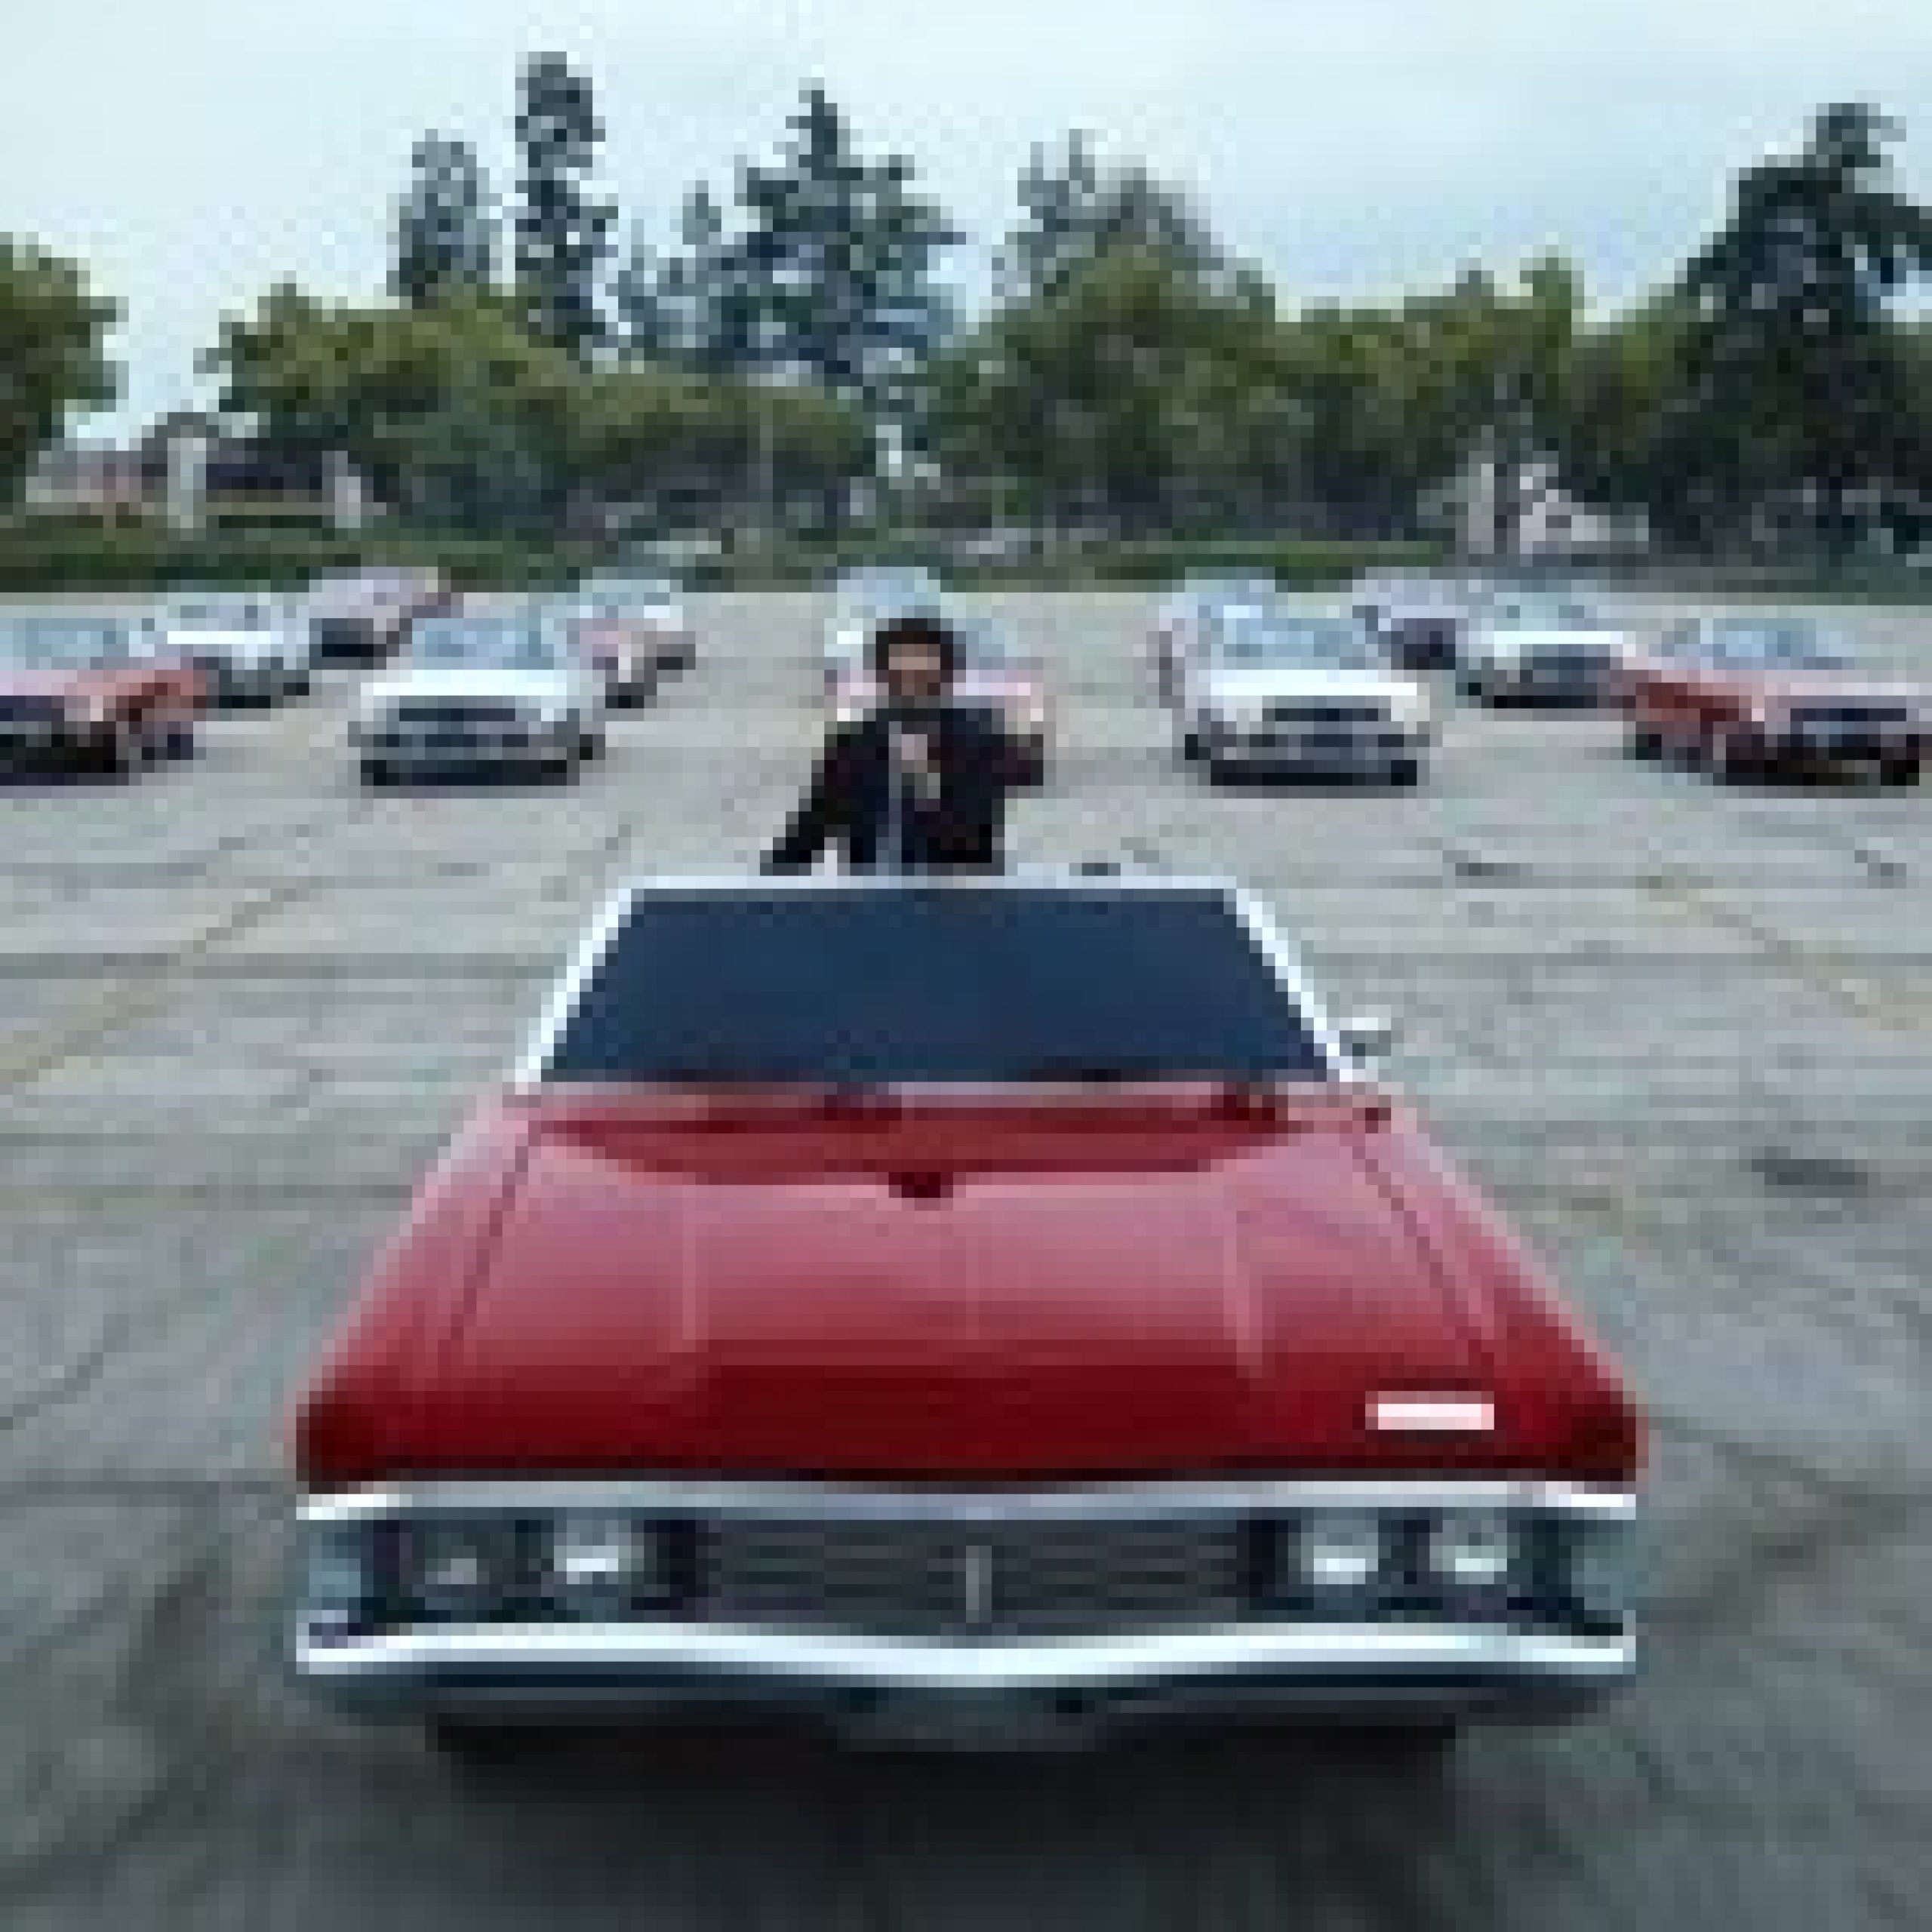 Inside The Weeknd’s Billboard Music Awards Car Choreography: ‘There Was a Lot of Trust’